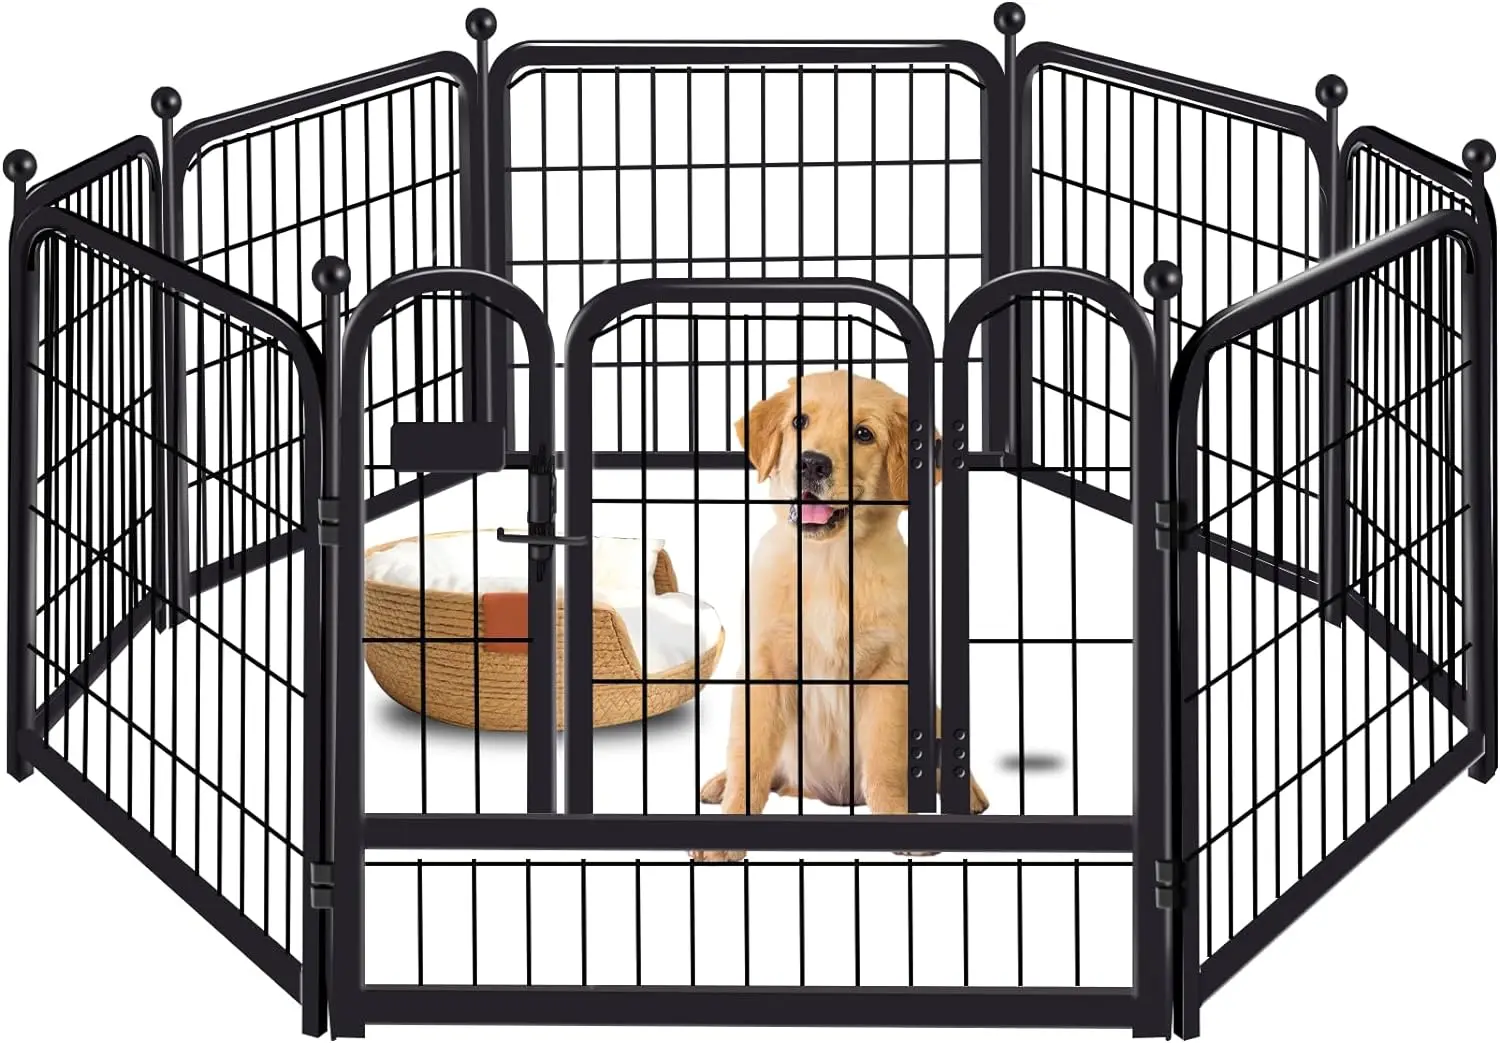 

24" Dog Playpen 8 Panels Designed for Indoor & Outdoor Use & Camping,Yard,Dog Crate,Dog Kennel,Puppy Playpen,Keep Pets Secure